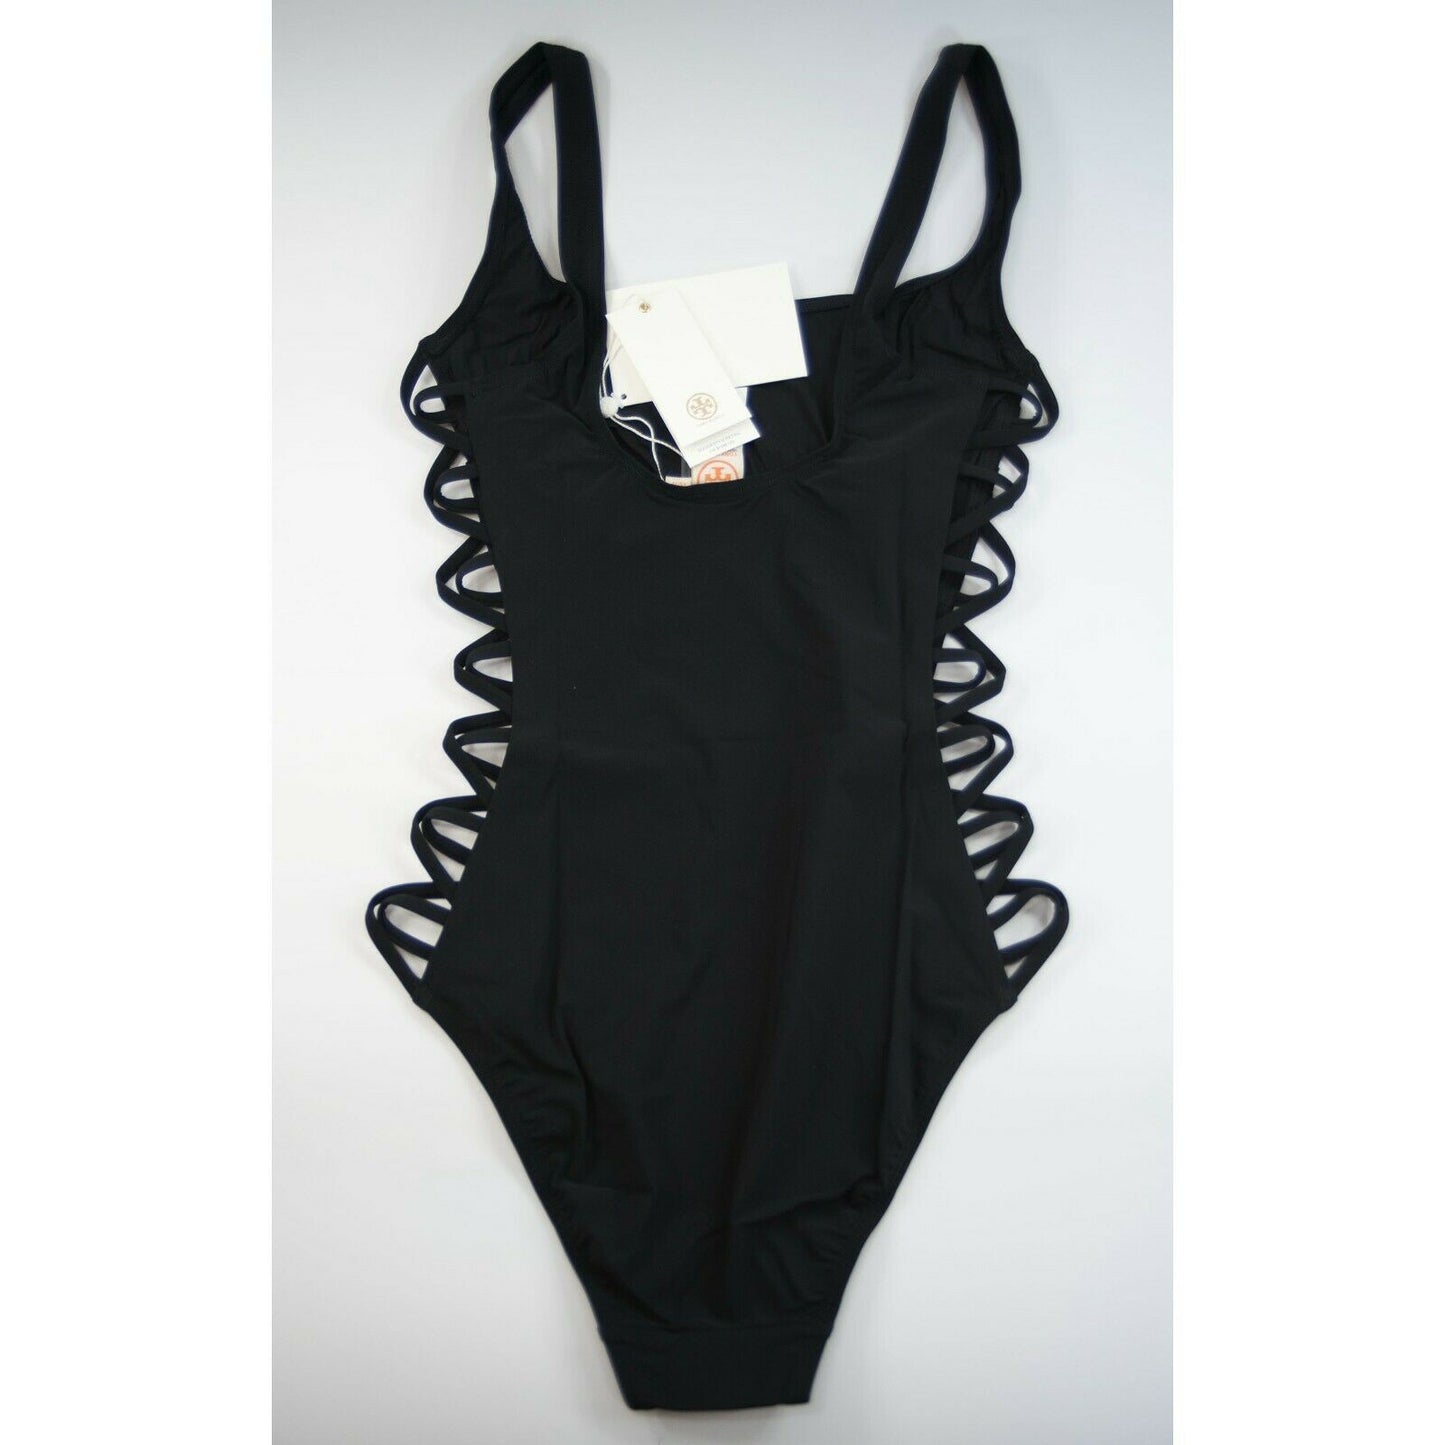 Tory Burch Black Lace-Up Tank One Piece Swimsuit XS NWT